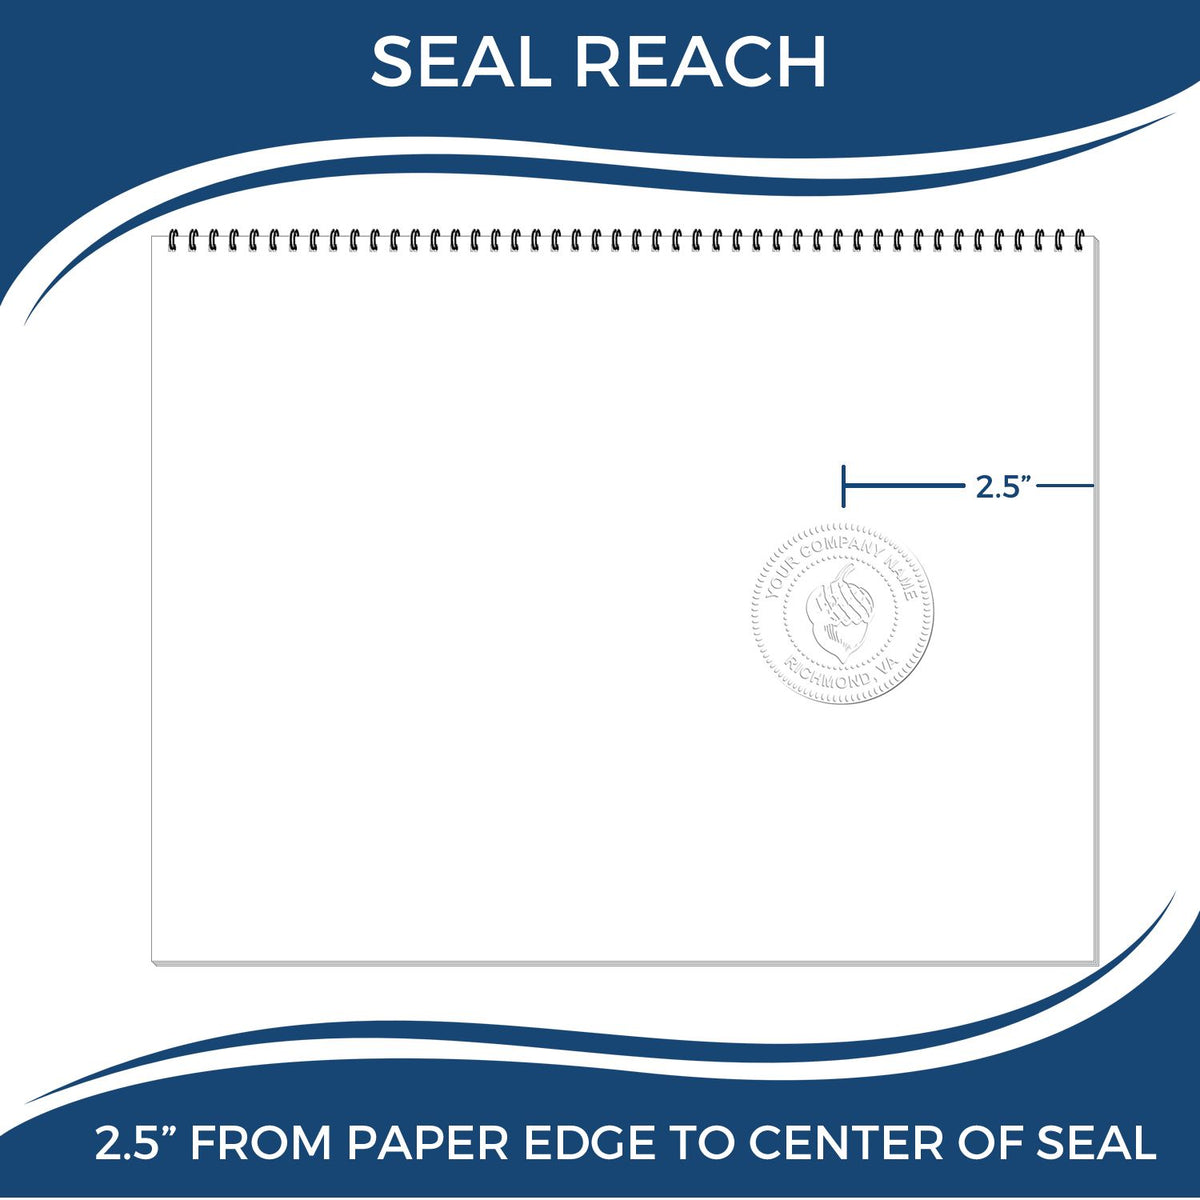 An infographic showing the seal reach which is represented by a ruler and a miniature seal image of the Long Reach Alaska PE Seal